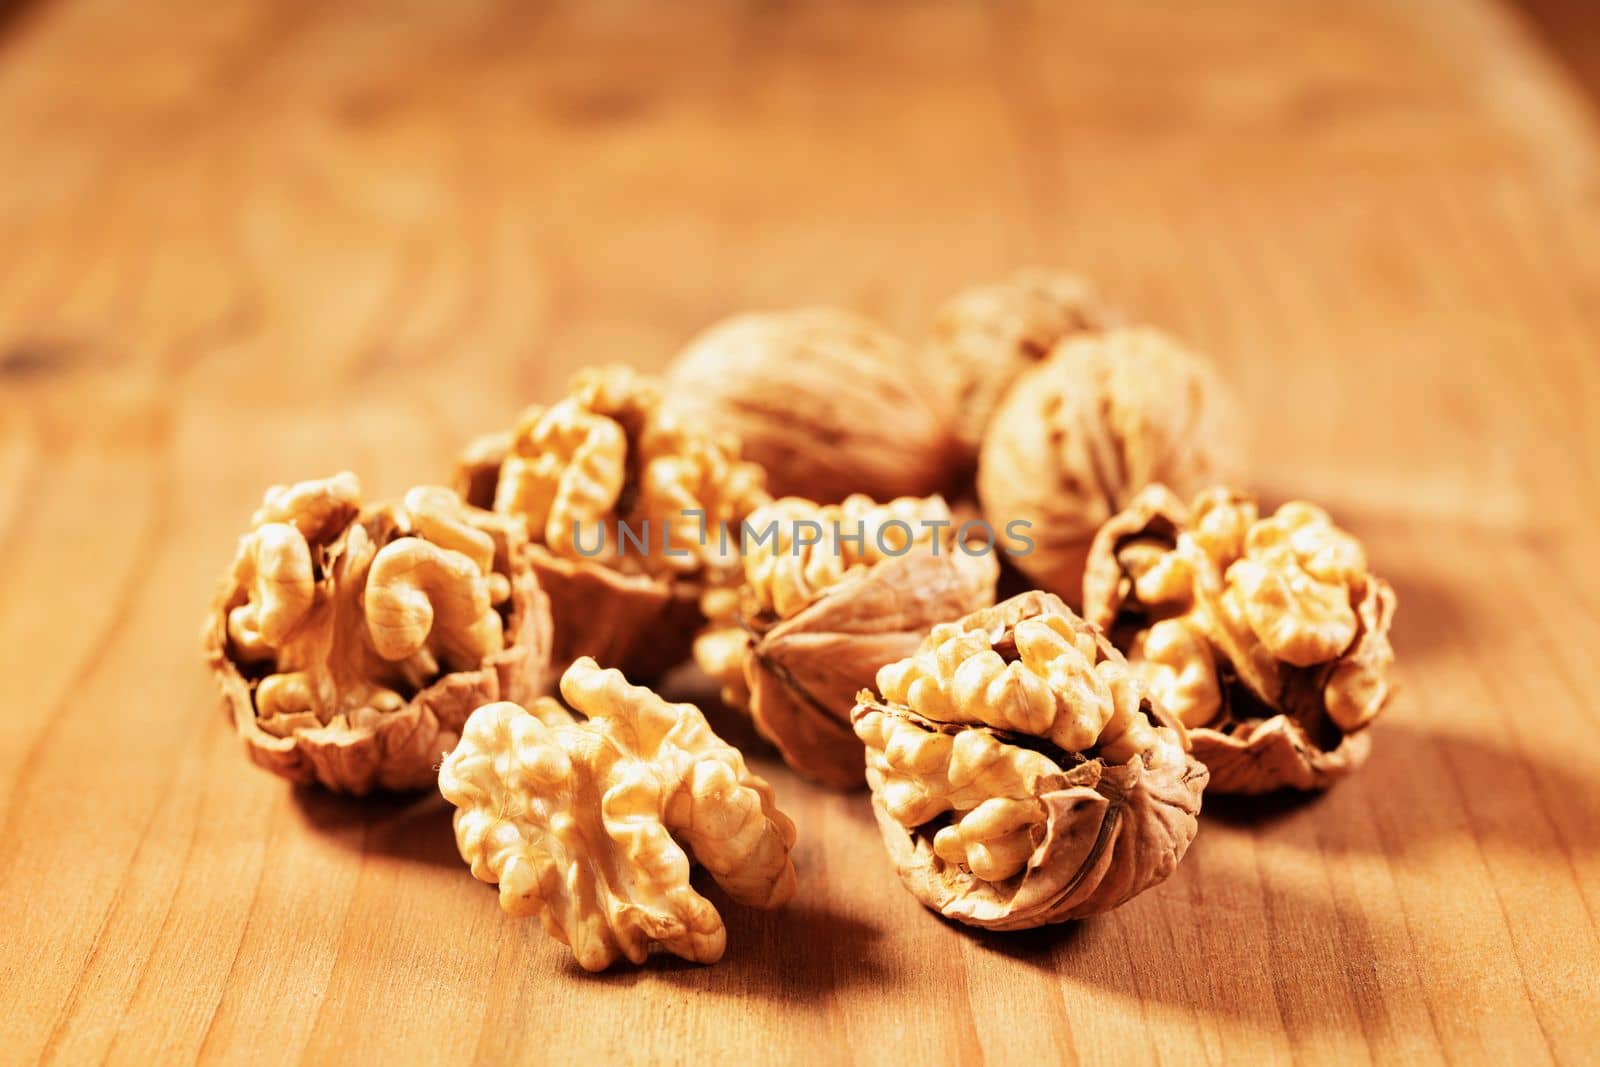 Opened walnuts  on wooden table  , healthy eating